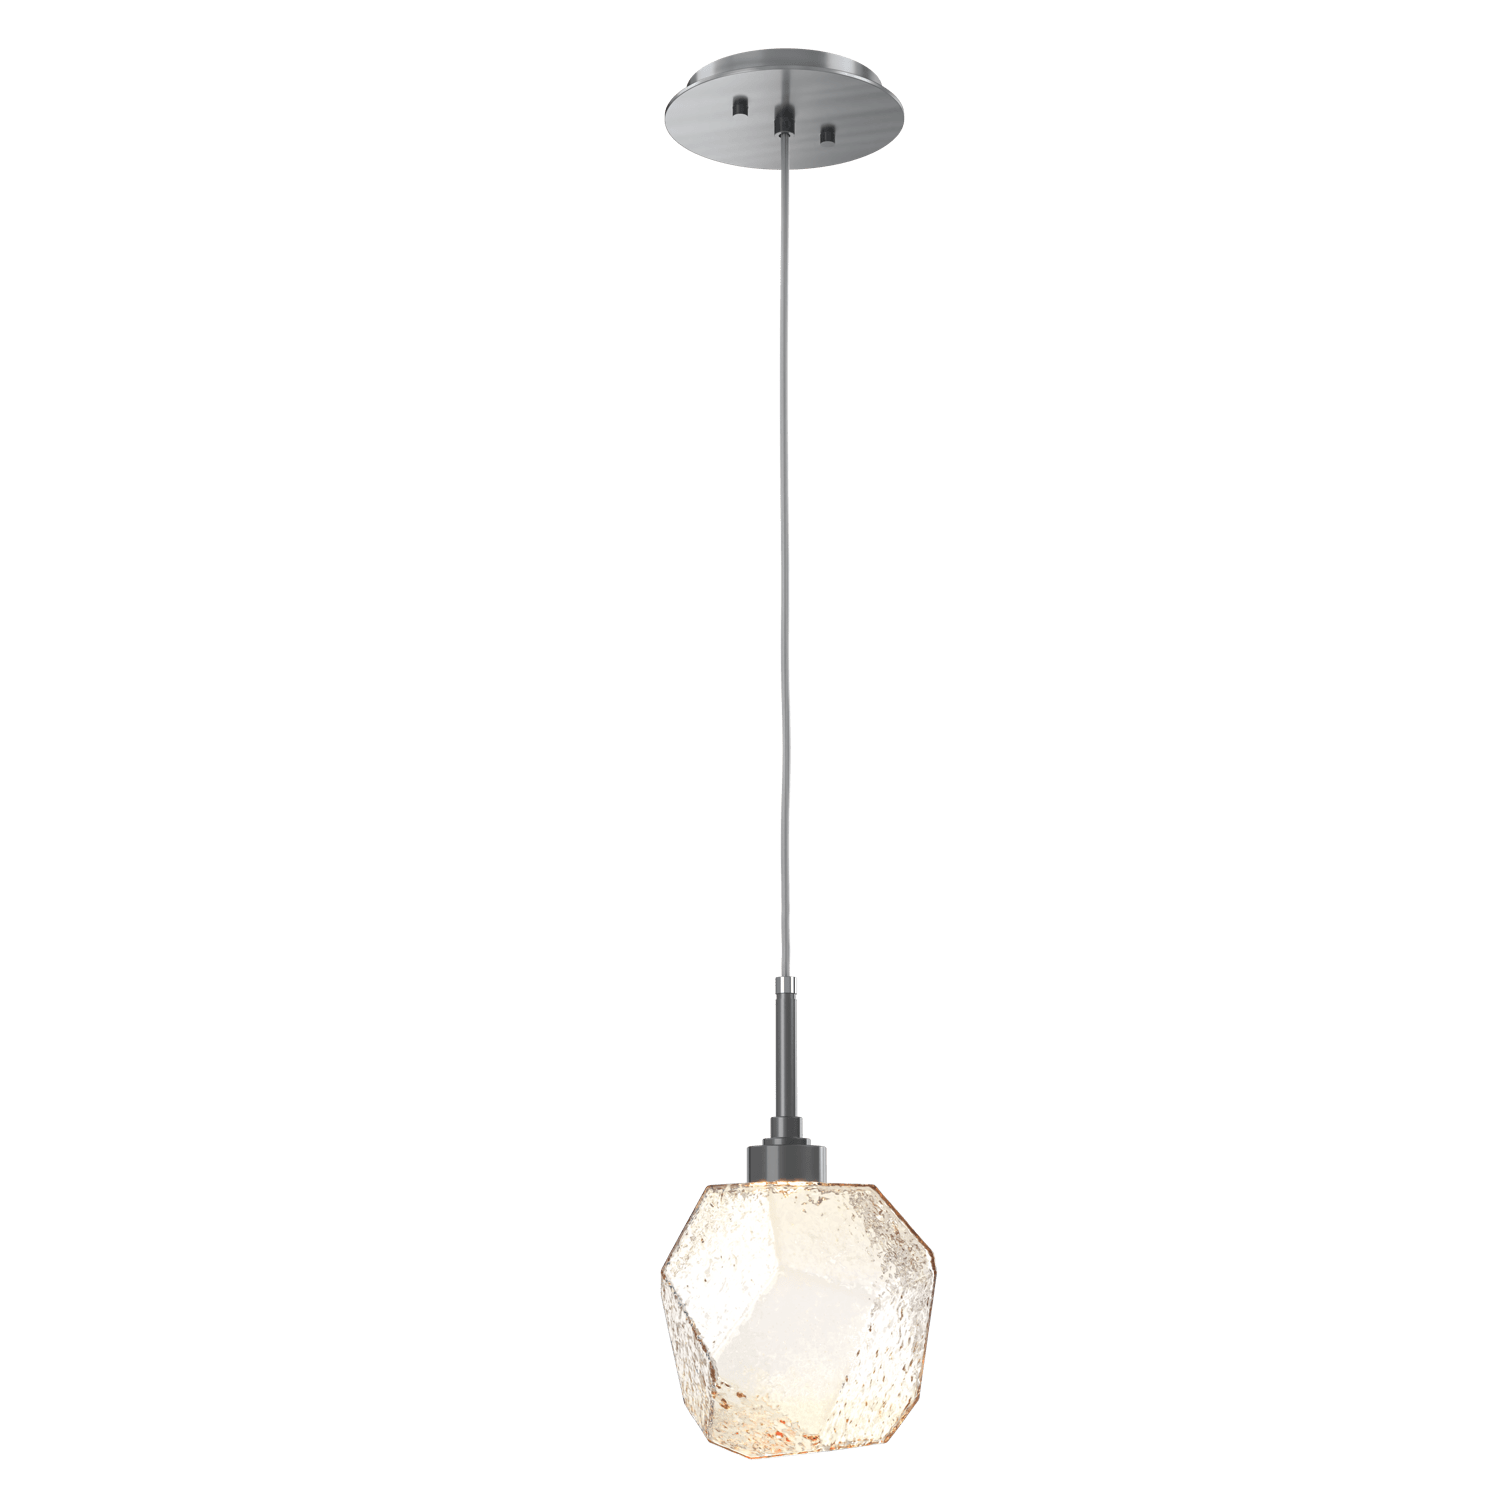 LAB0039-01-GM-A-Hammerton-Studio-Gem-pendant-light-with-gunmetal-finish-and-amber-blown-glass-shades-and-LED-lamping